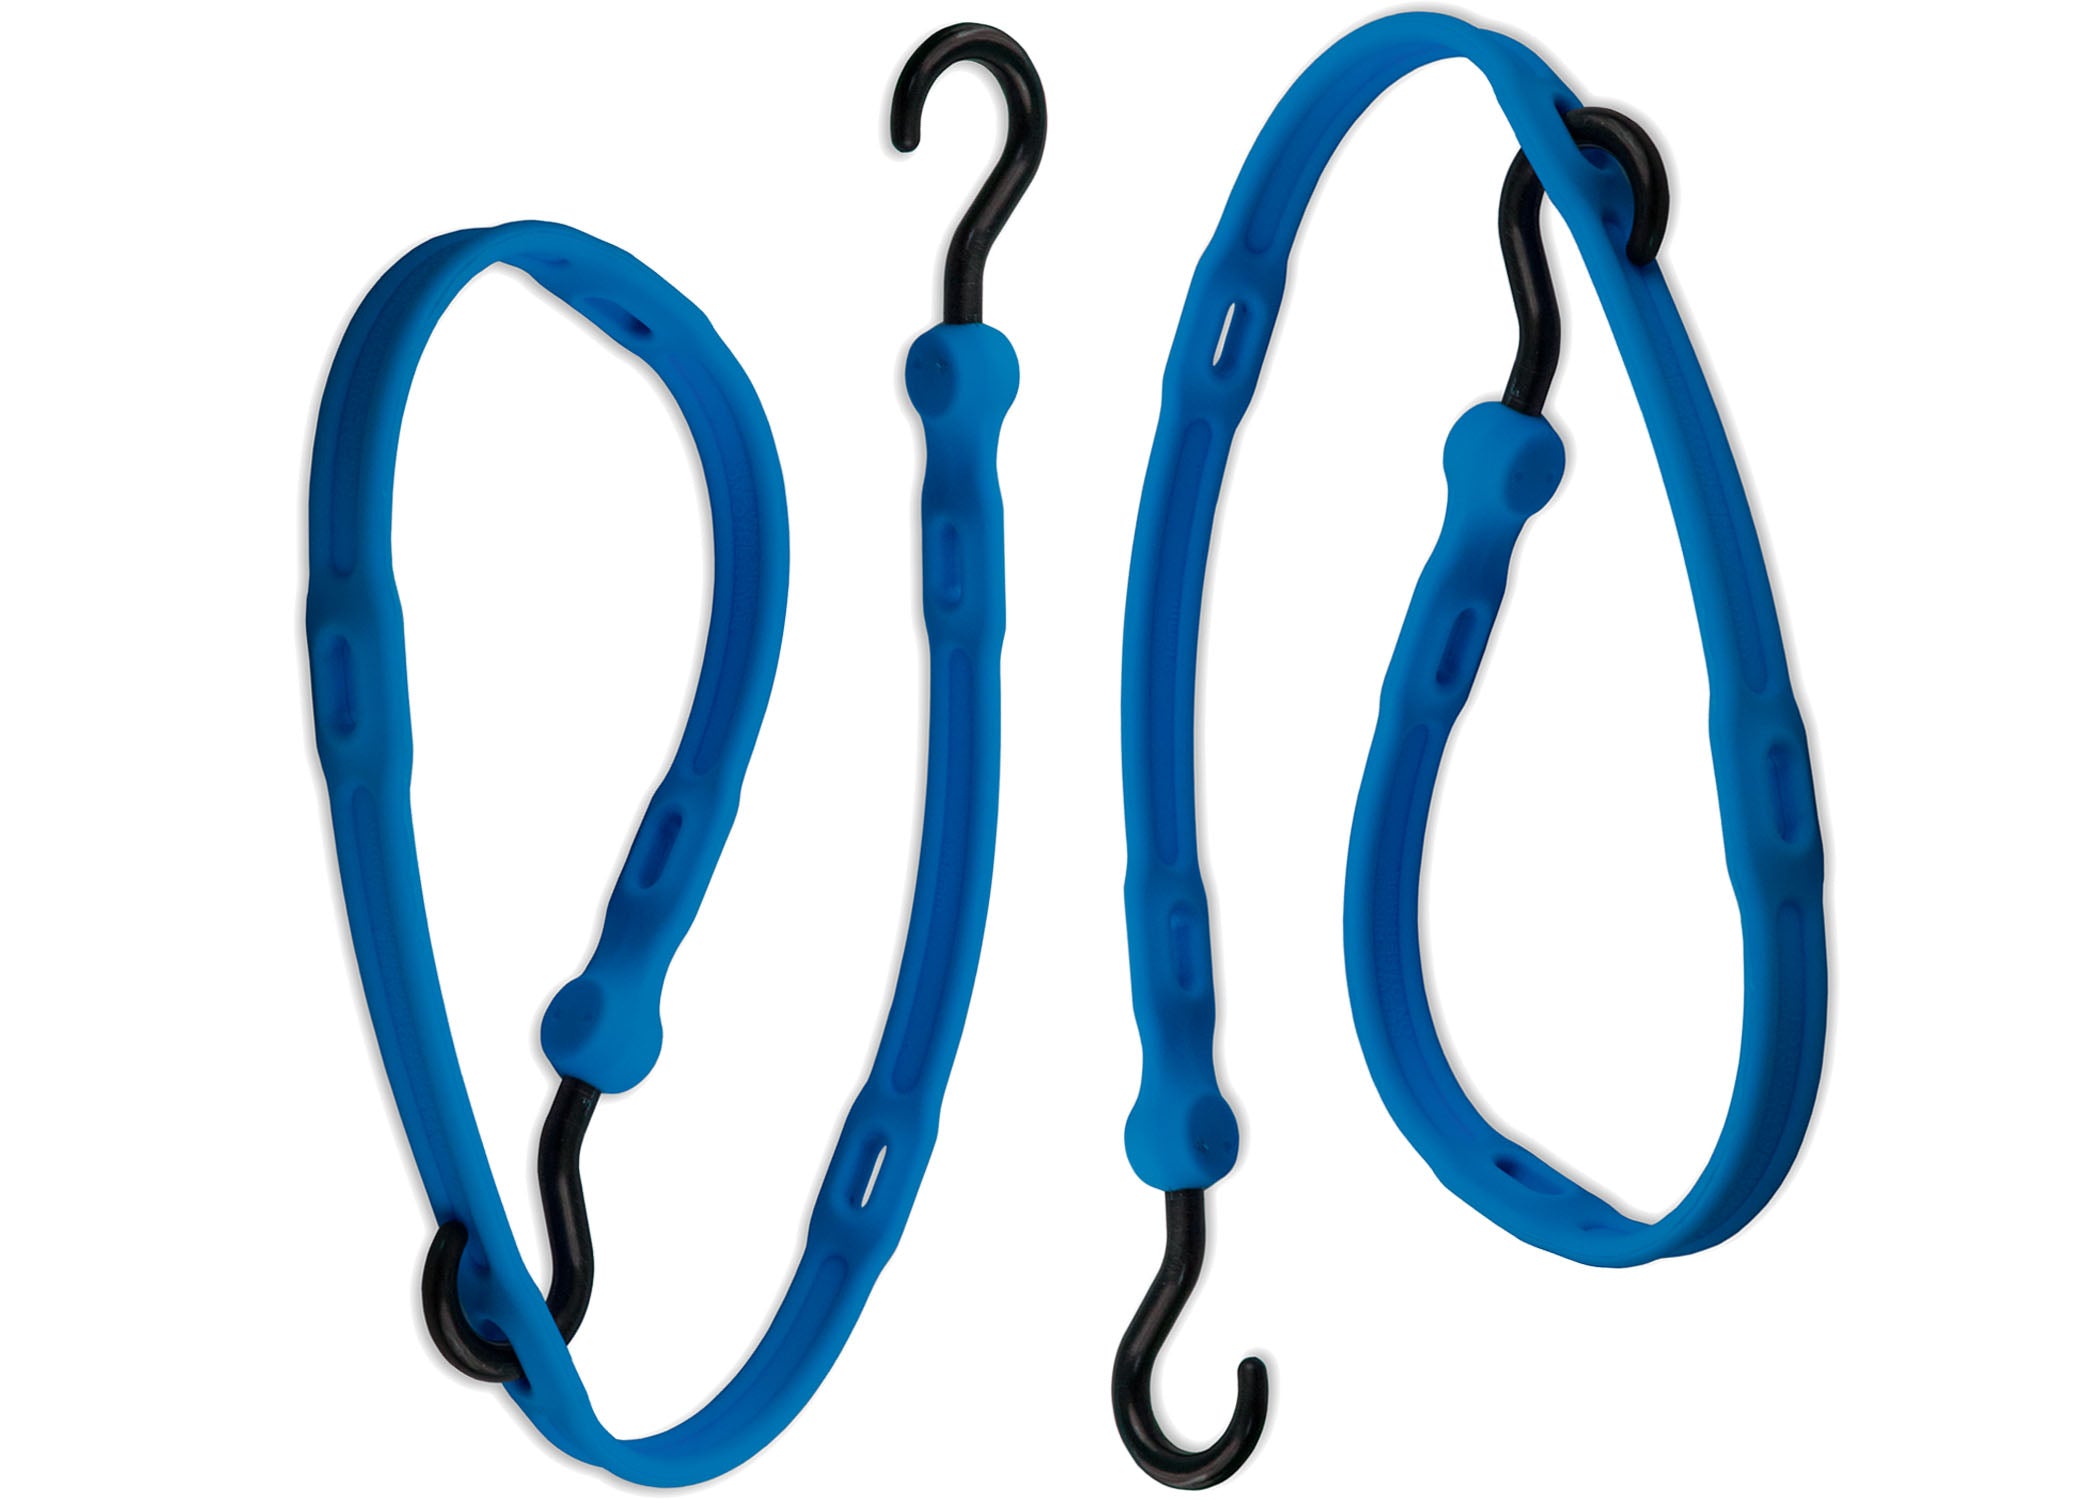 The Perfect Bungee 36" Adjust-A-Strap 4 Pack